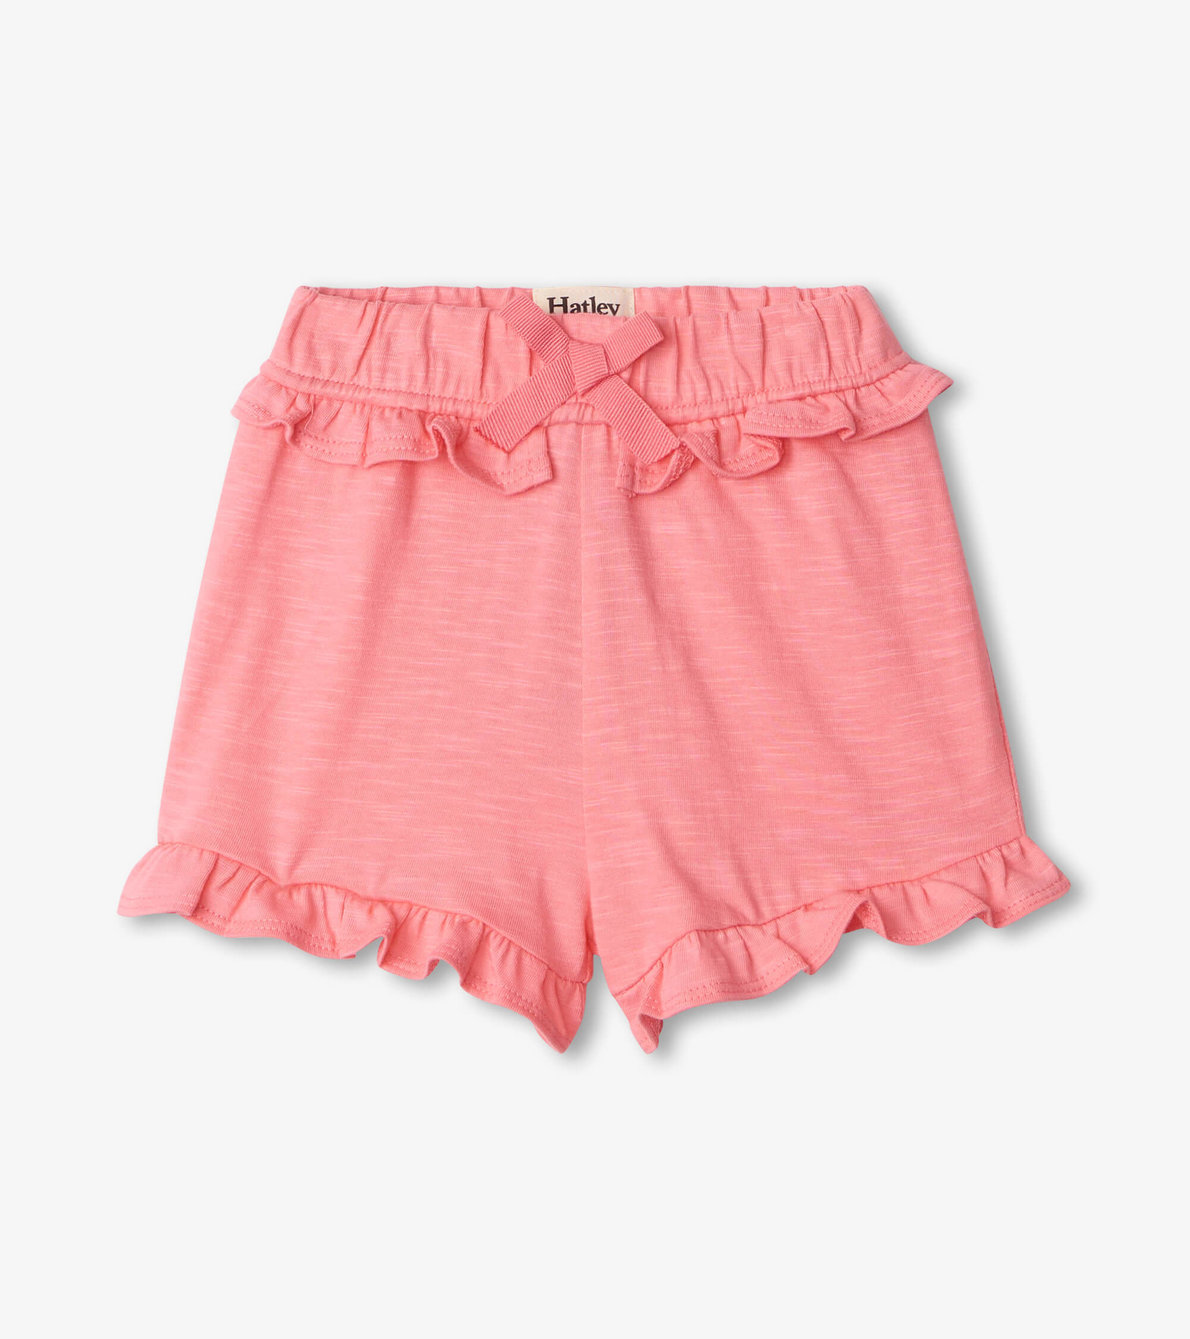 View larger image of Pink Baby Ruffle Shorts